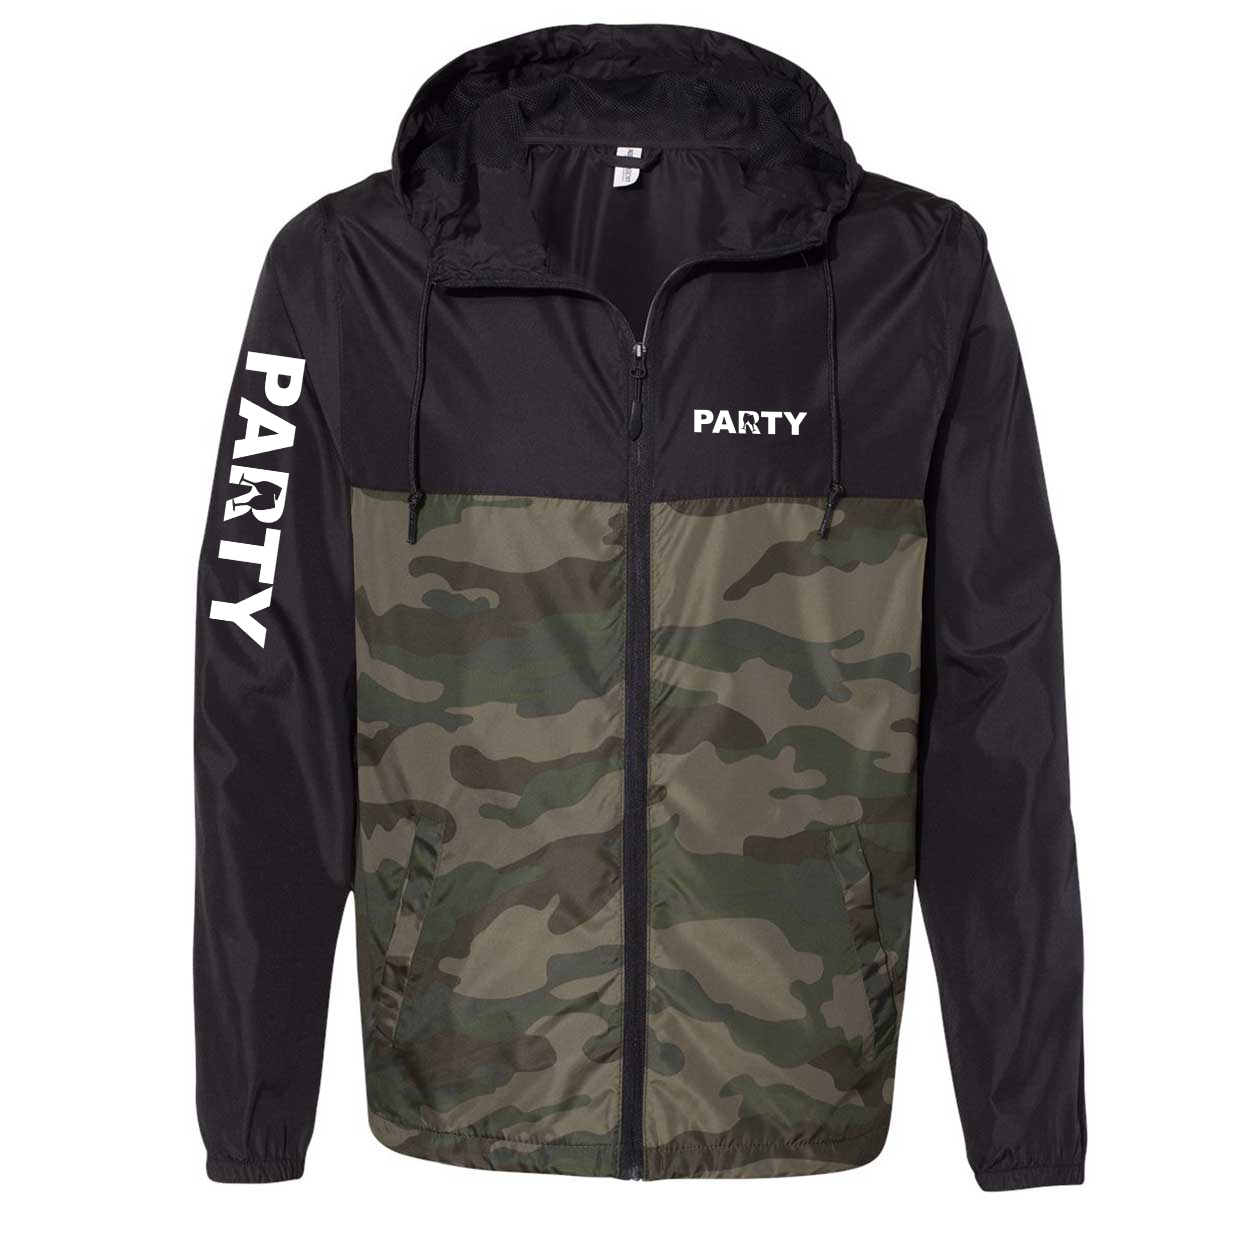 Party Cheers Logo Classic Lightweight Windbreaker Black/Forest Camo (White Logo)